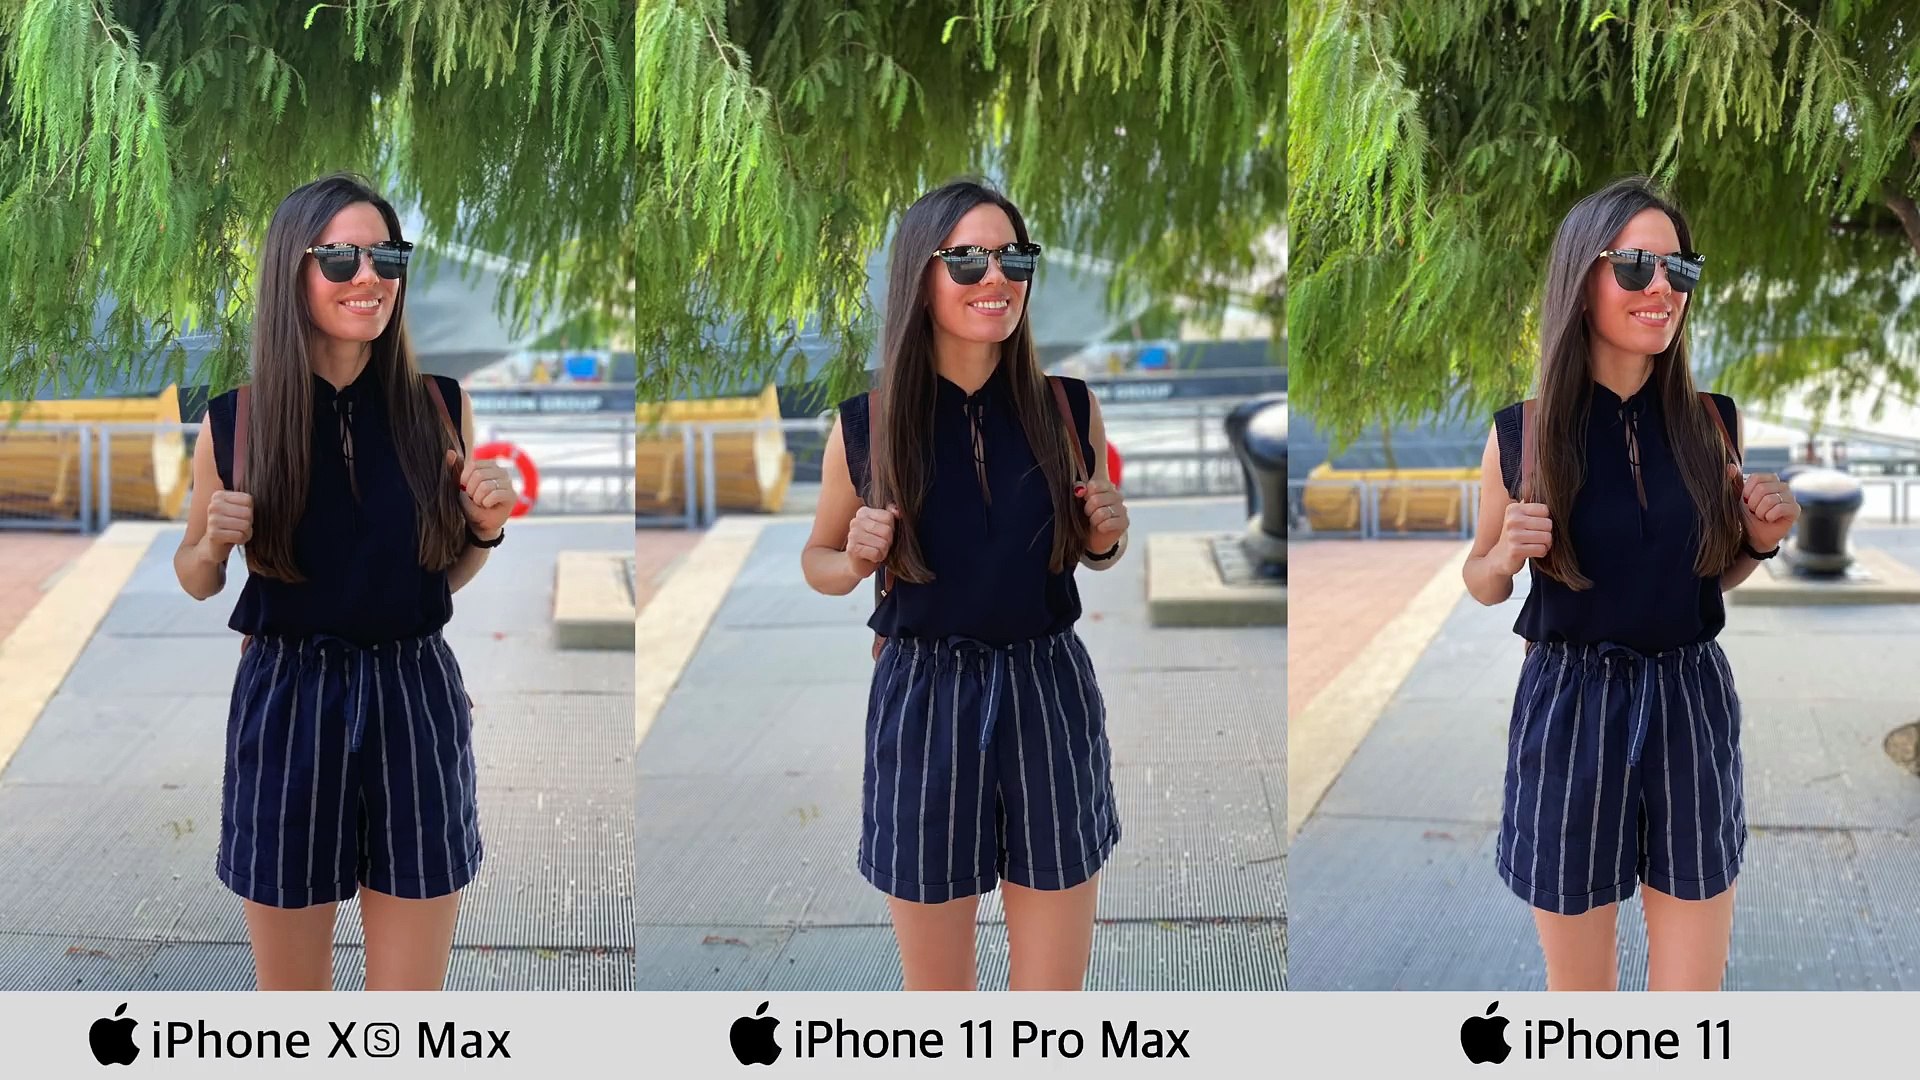 op vakantie Trojaanse paard andere iPhone 11 Pro Max vs iPhone Xs Max vs iPhone 11 Camera Test - video  Dailymotion